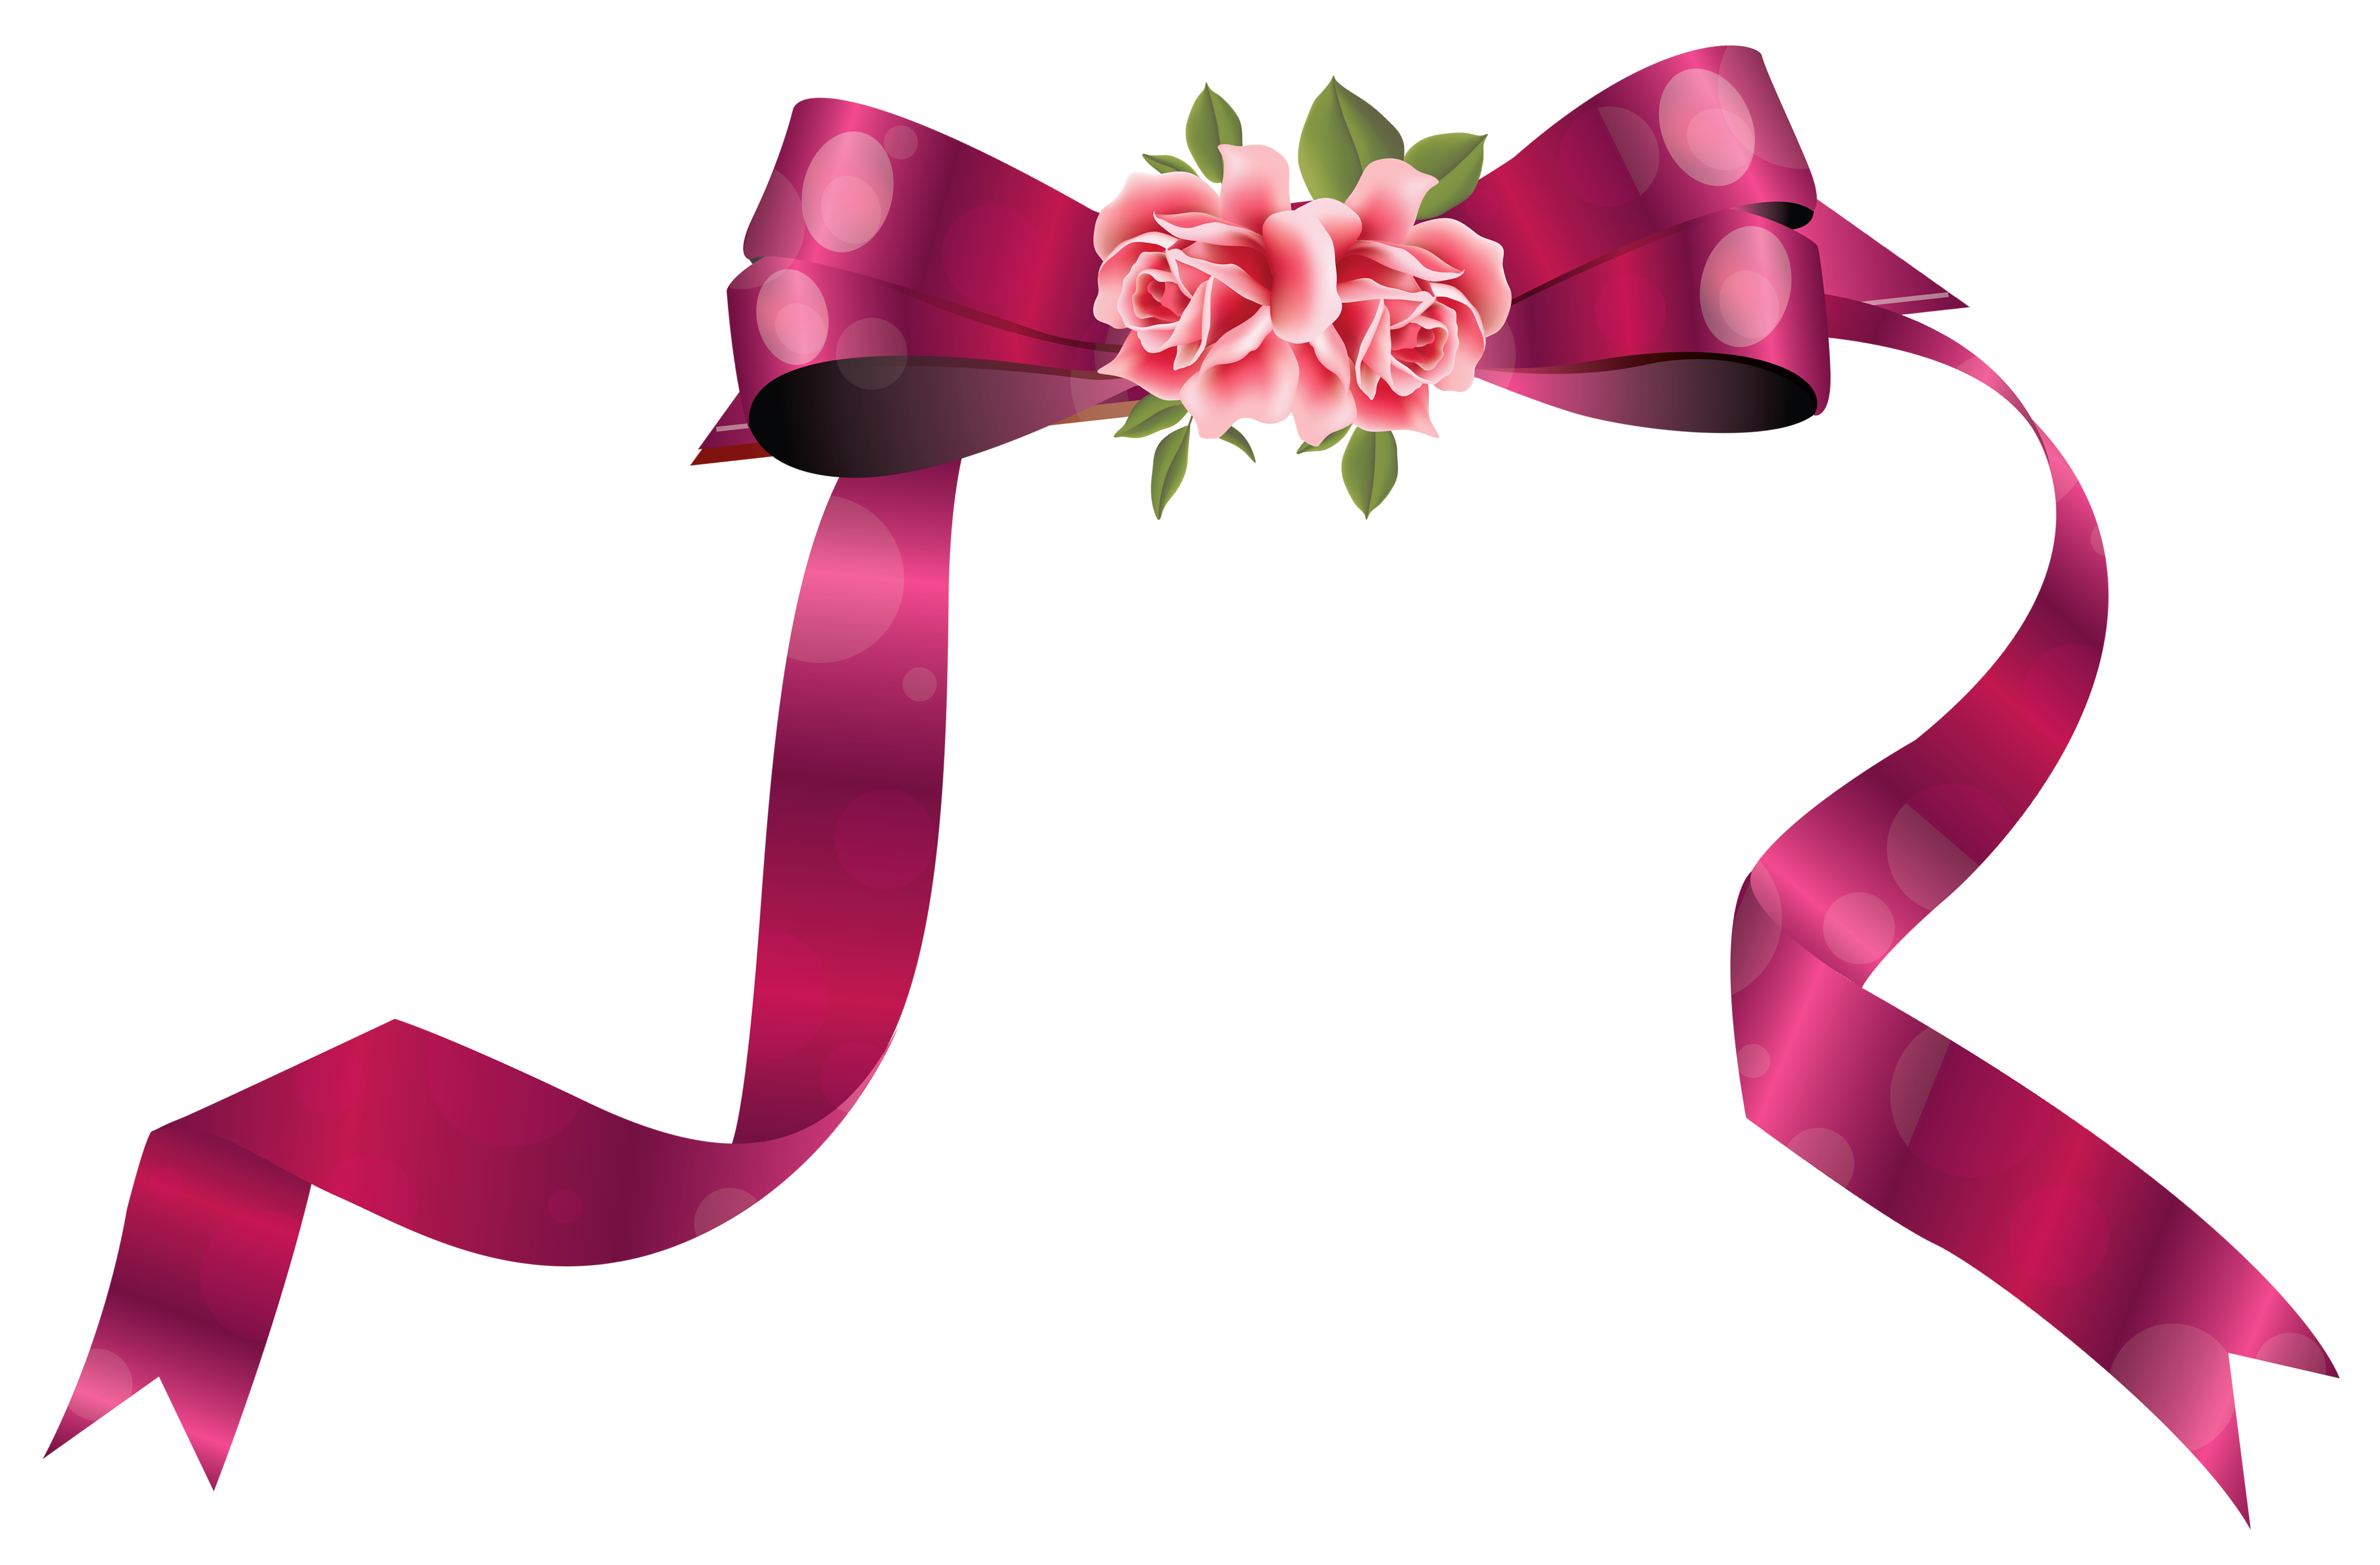 Decorative clipart ribbon. With roses png image